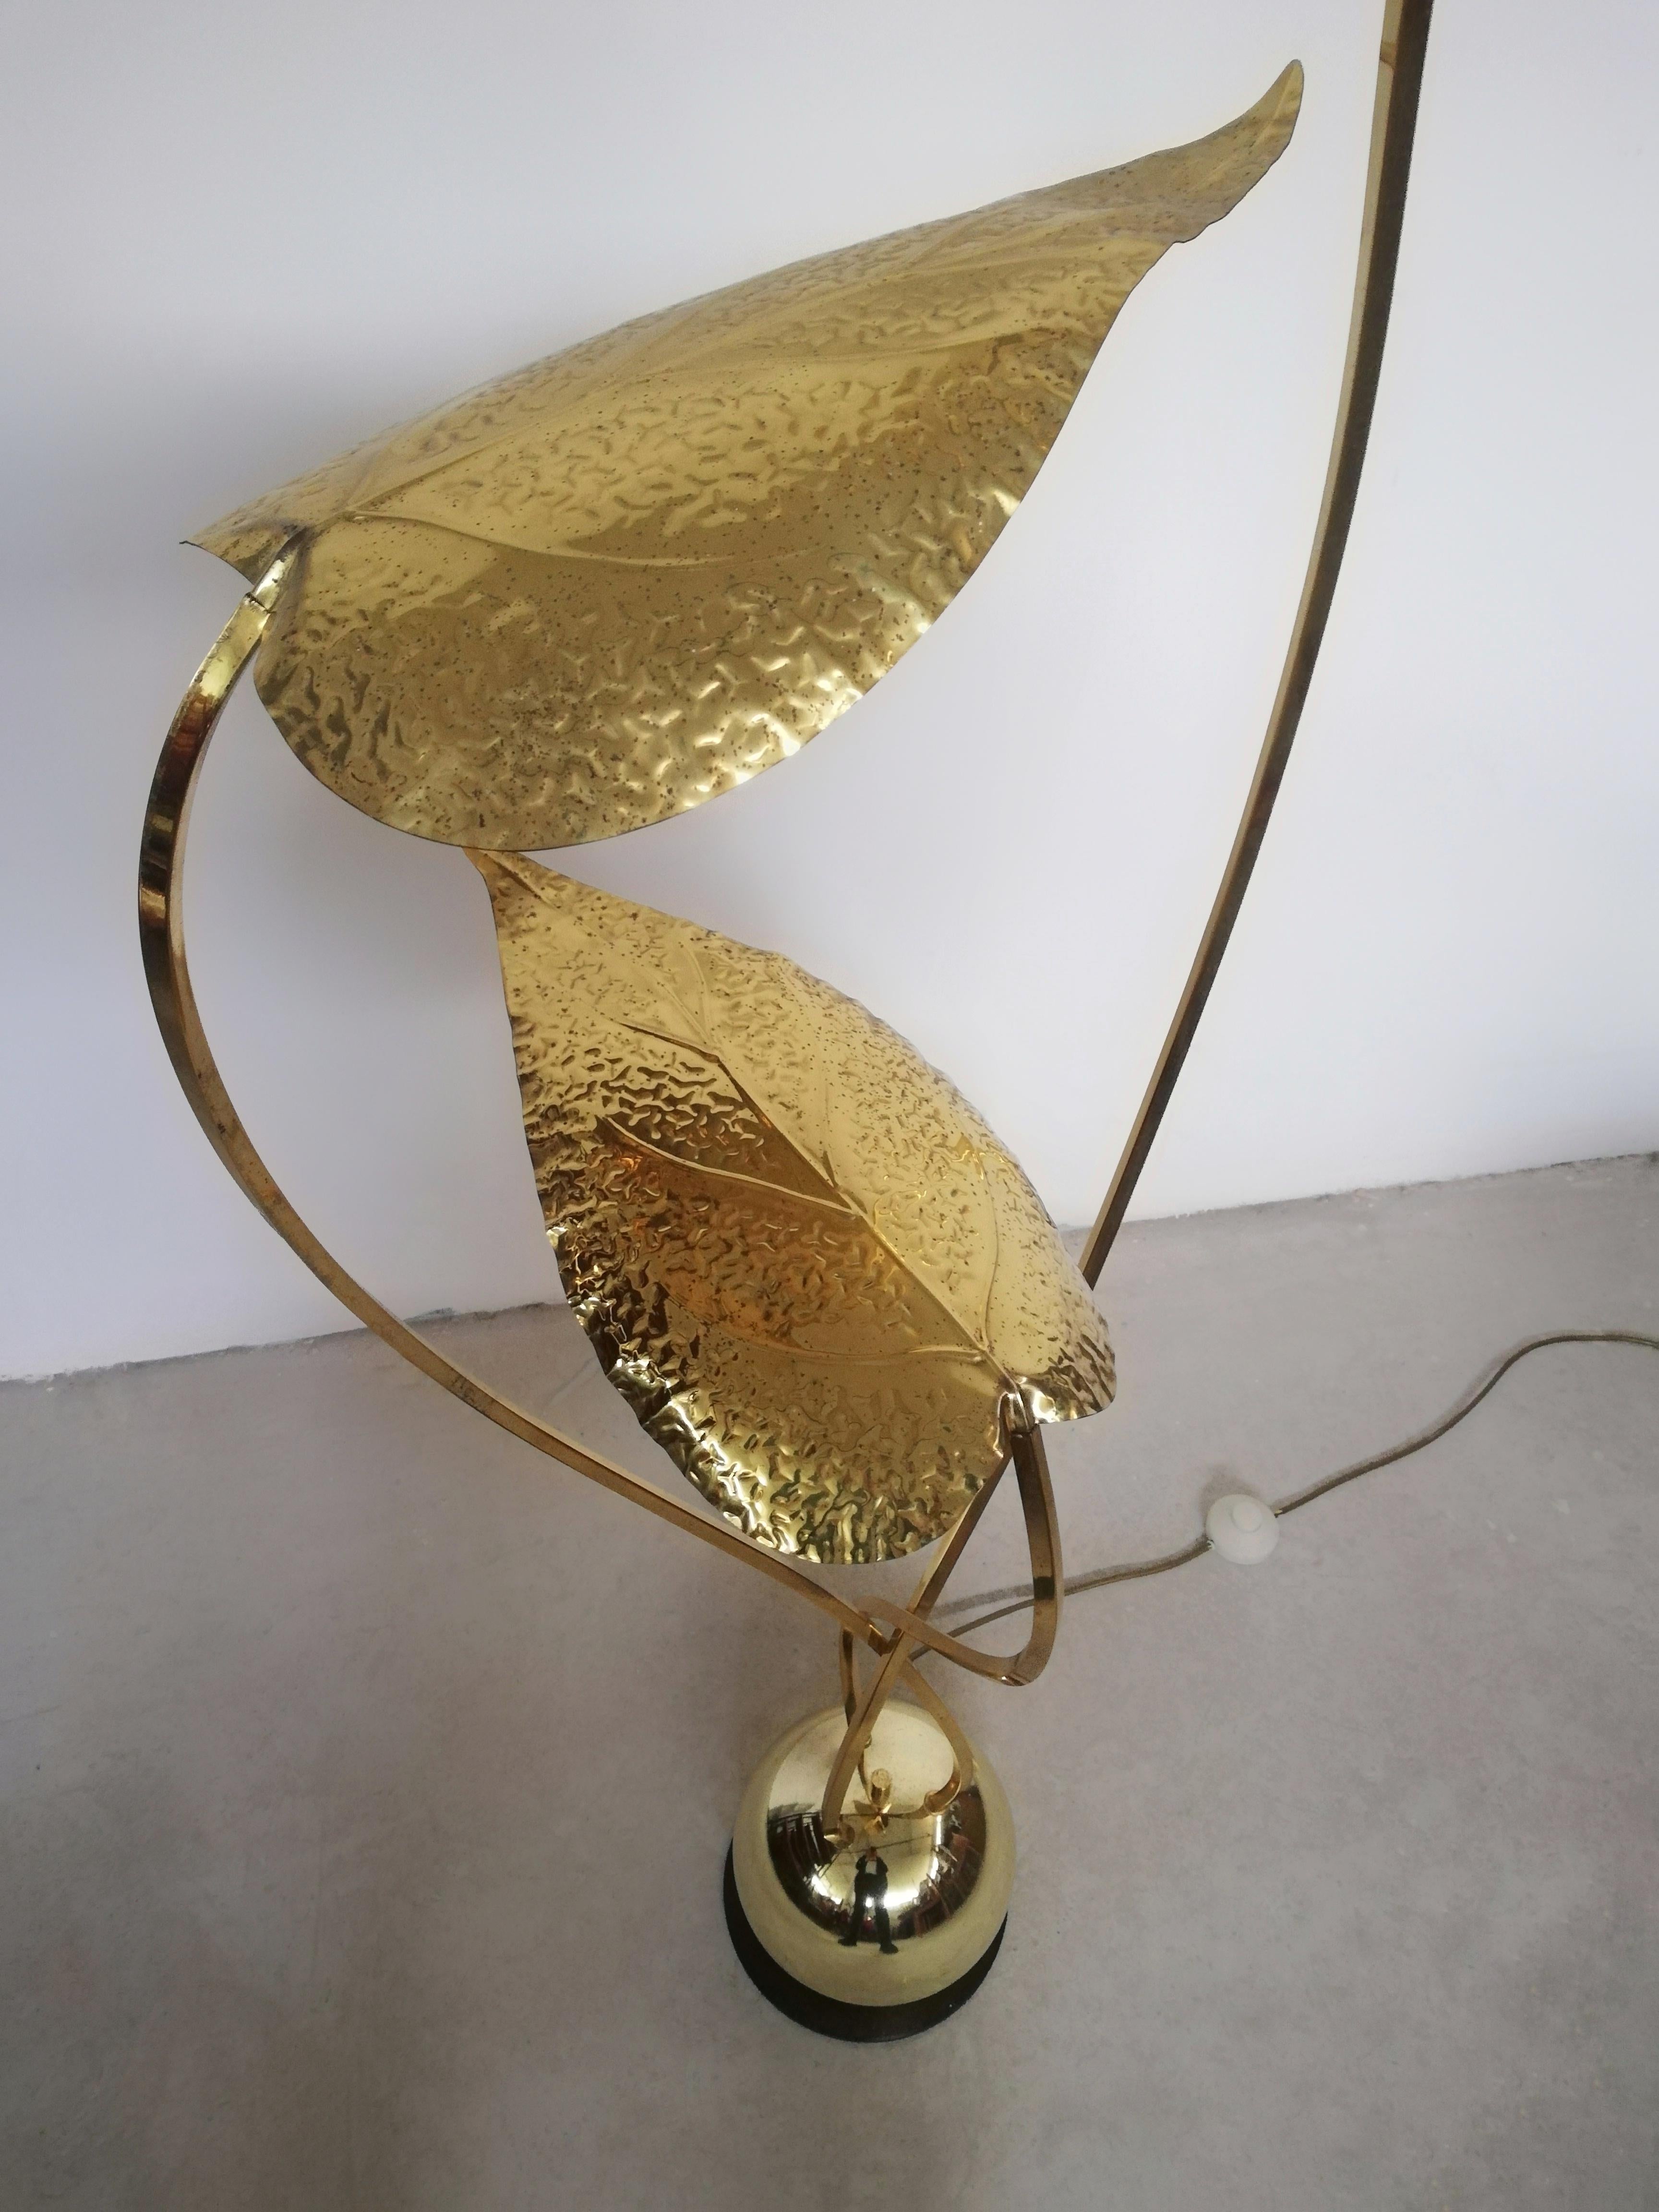 Beautiful floor lamp produced between the 70s and 80s in Italy by Bottega Gadda and designed by Carlo Giorgi.
Three thin stems emerge from a brass-plated metal sphere ending with three large brass leaves that hide three light points.
The brass is